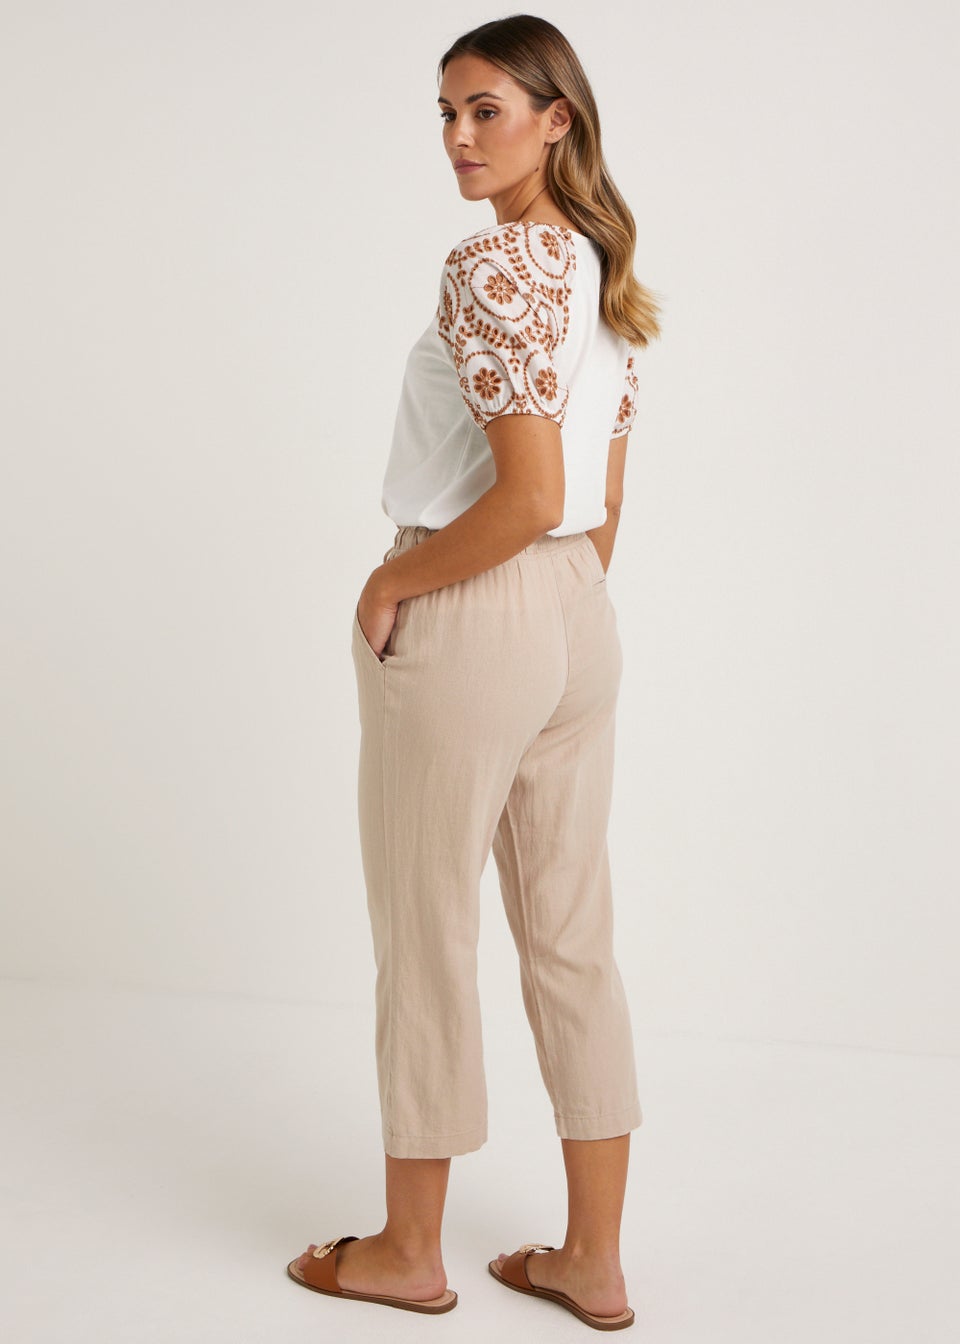 Discover 94+ matalan linen trousers best - in.cdgdbentre